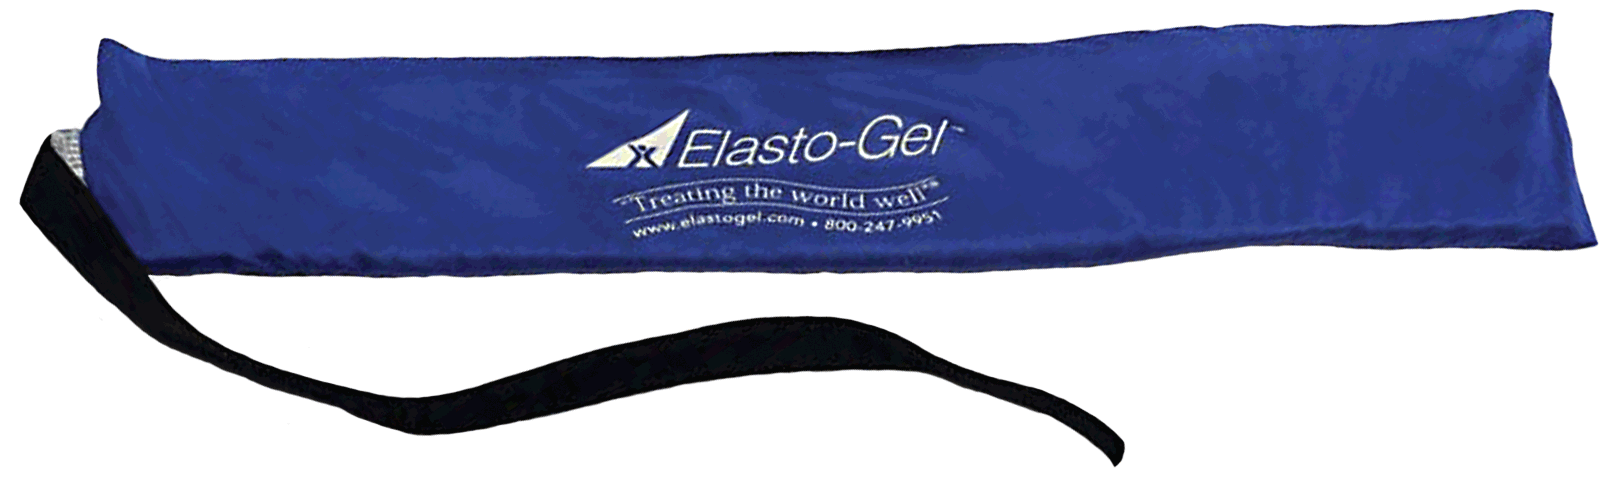 EA/1 - Southwest Technologies Elasto-Gel&trade; Hot/Cold Wrap 4" x 24", Re-Usable, Not Leak if Punctured - Best Buy Medical Supplies